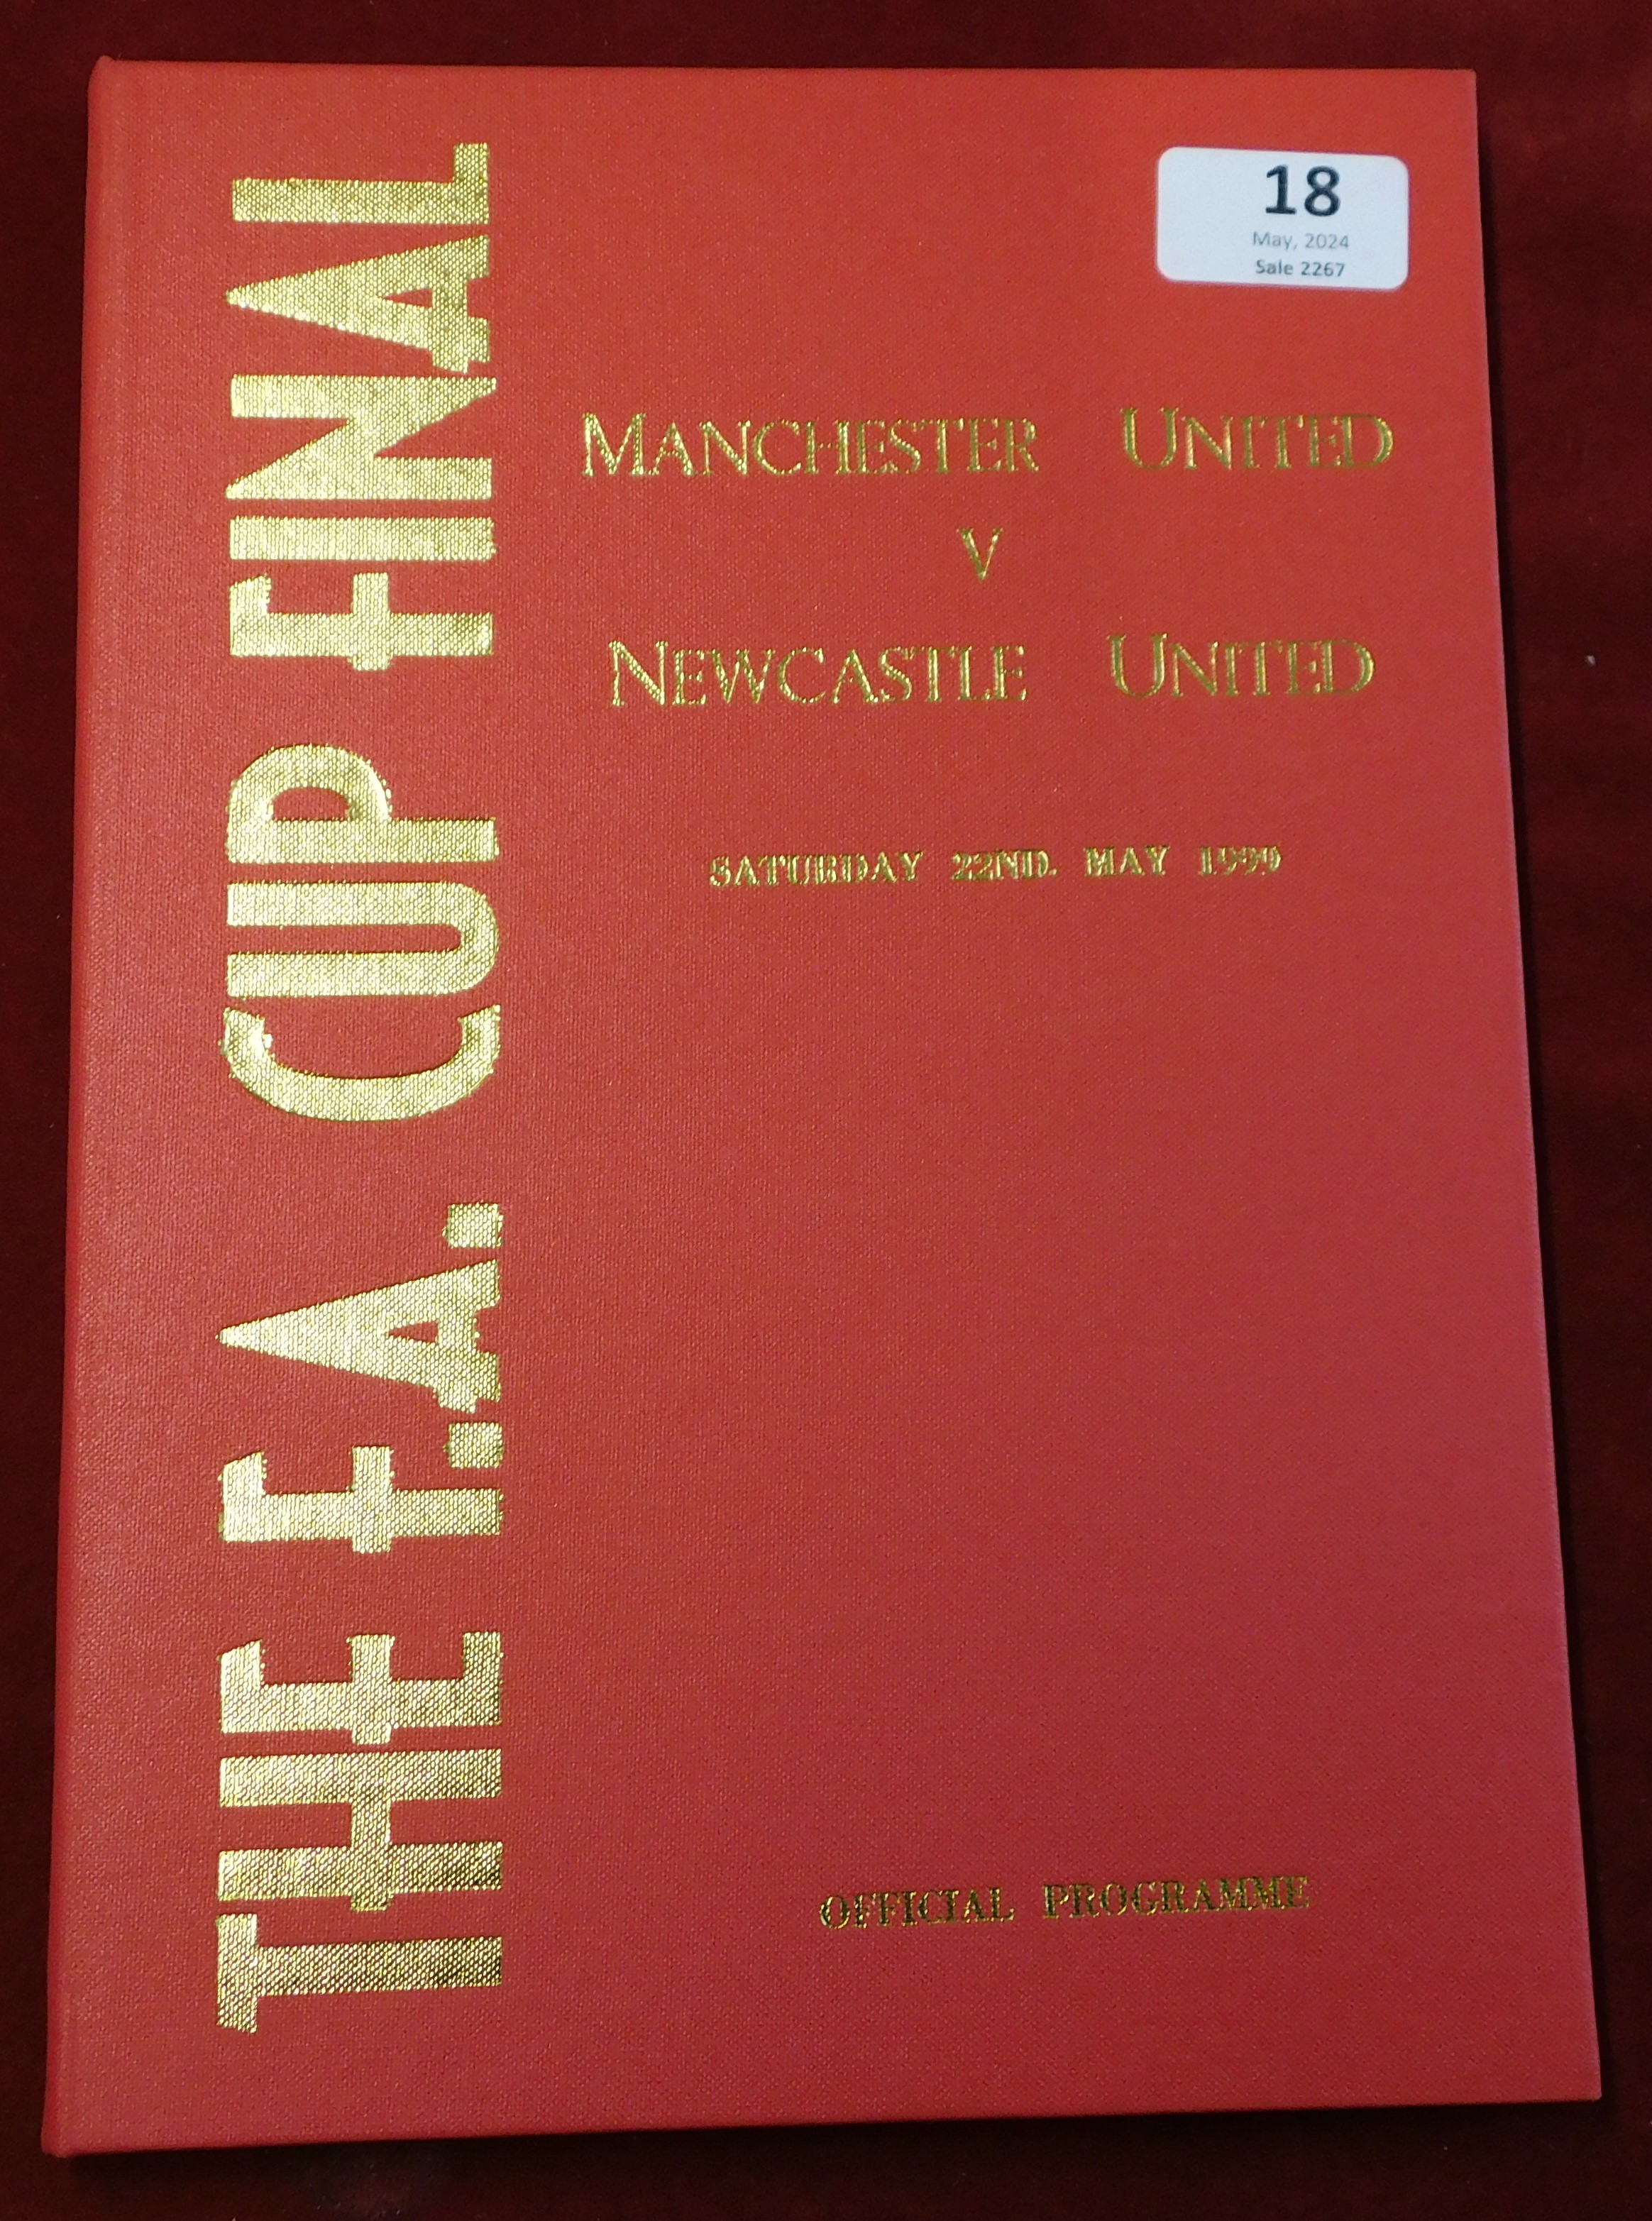 Official Bound programme for the Manchester United v Newcastle United FA Cup Final 22nd May 1999.